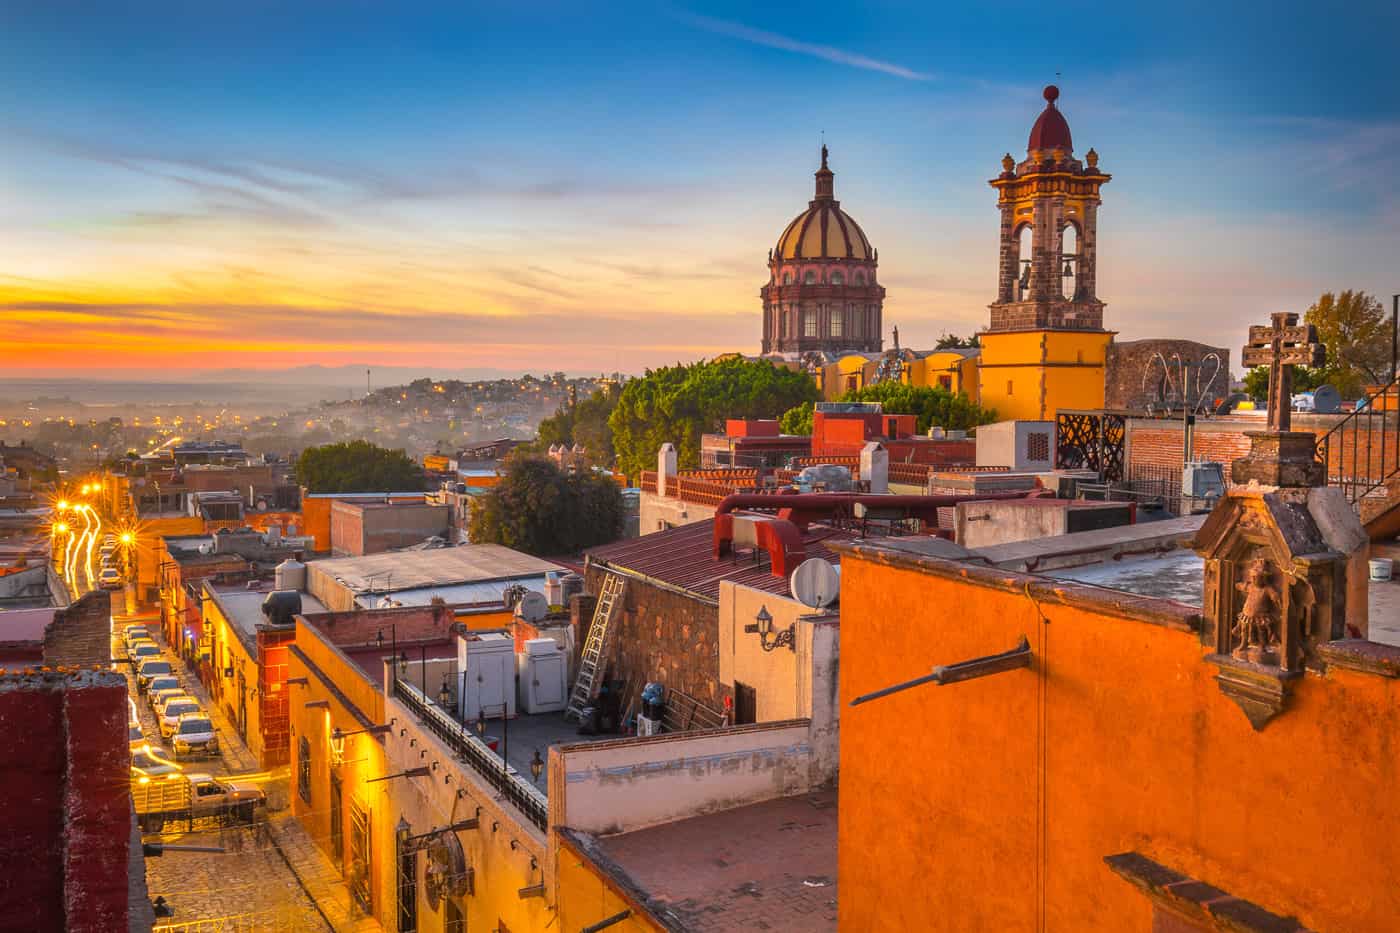 Visiting San Miguel de Allende: 10 Things to Know Before You Go